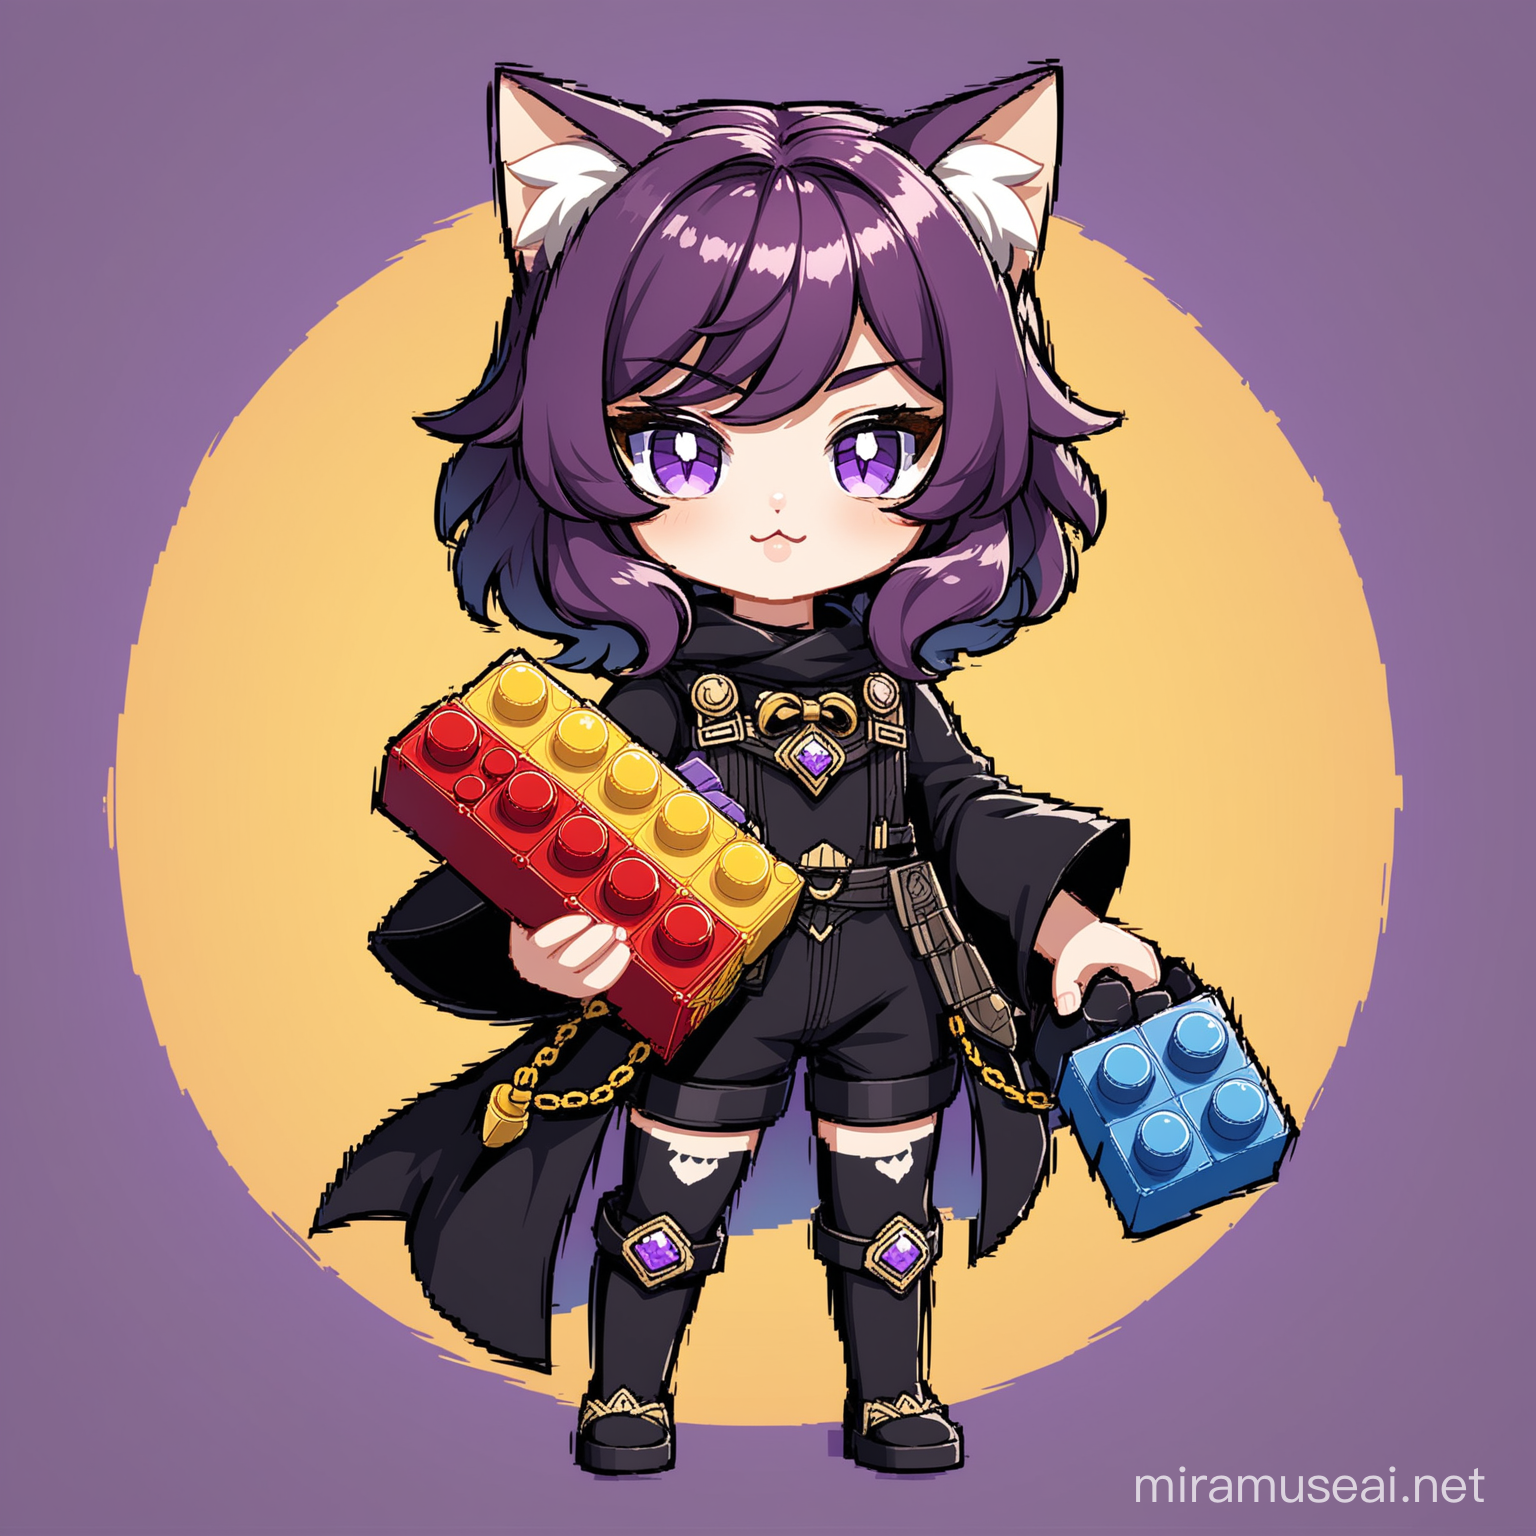 a cat girl with purple short wavy hair holding a bunch of lego in a black outfit in the style of a genshin character